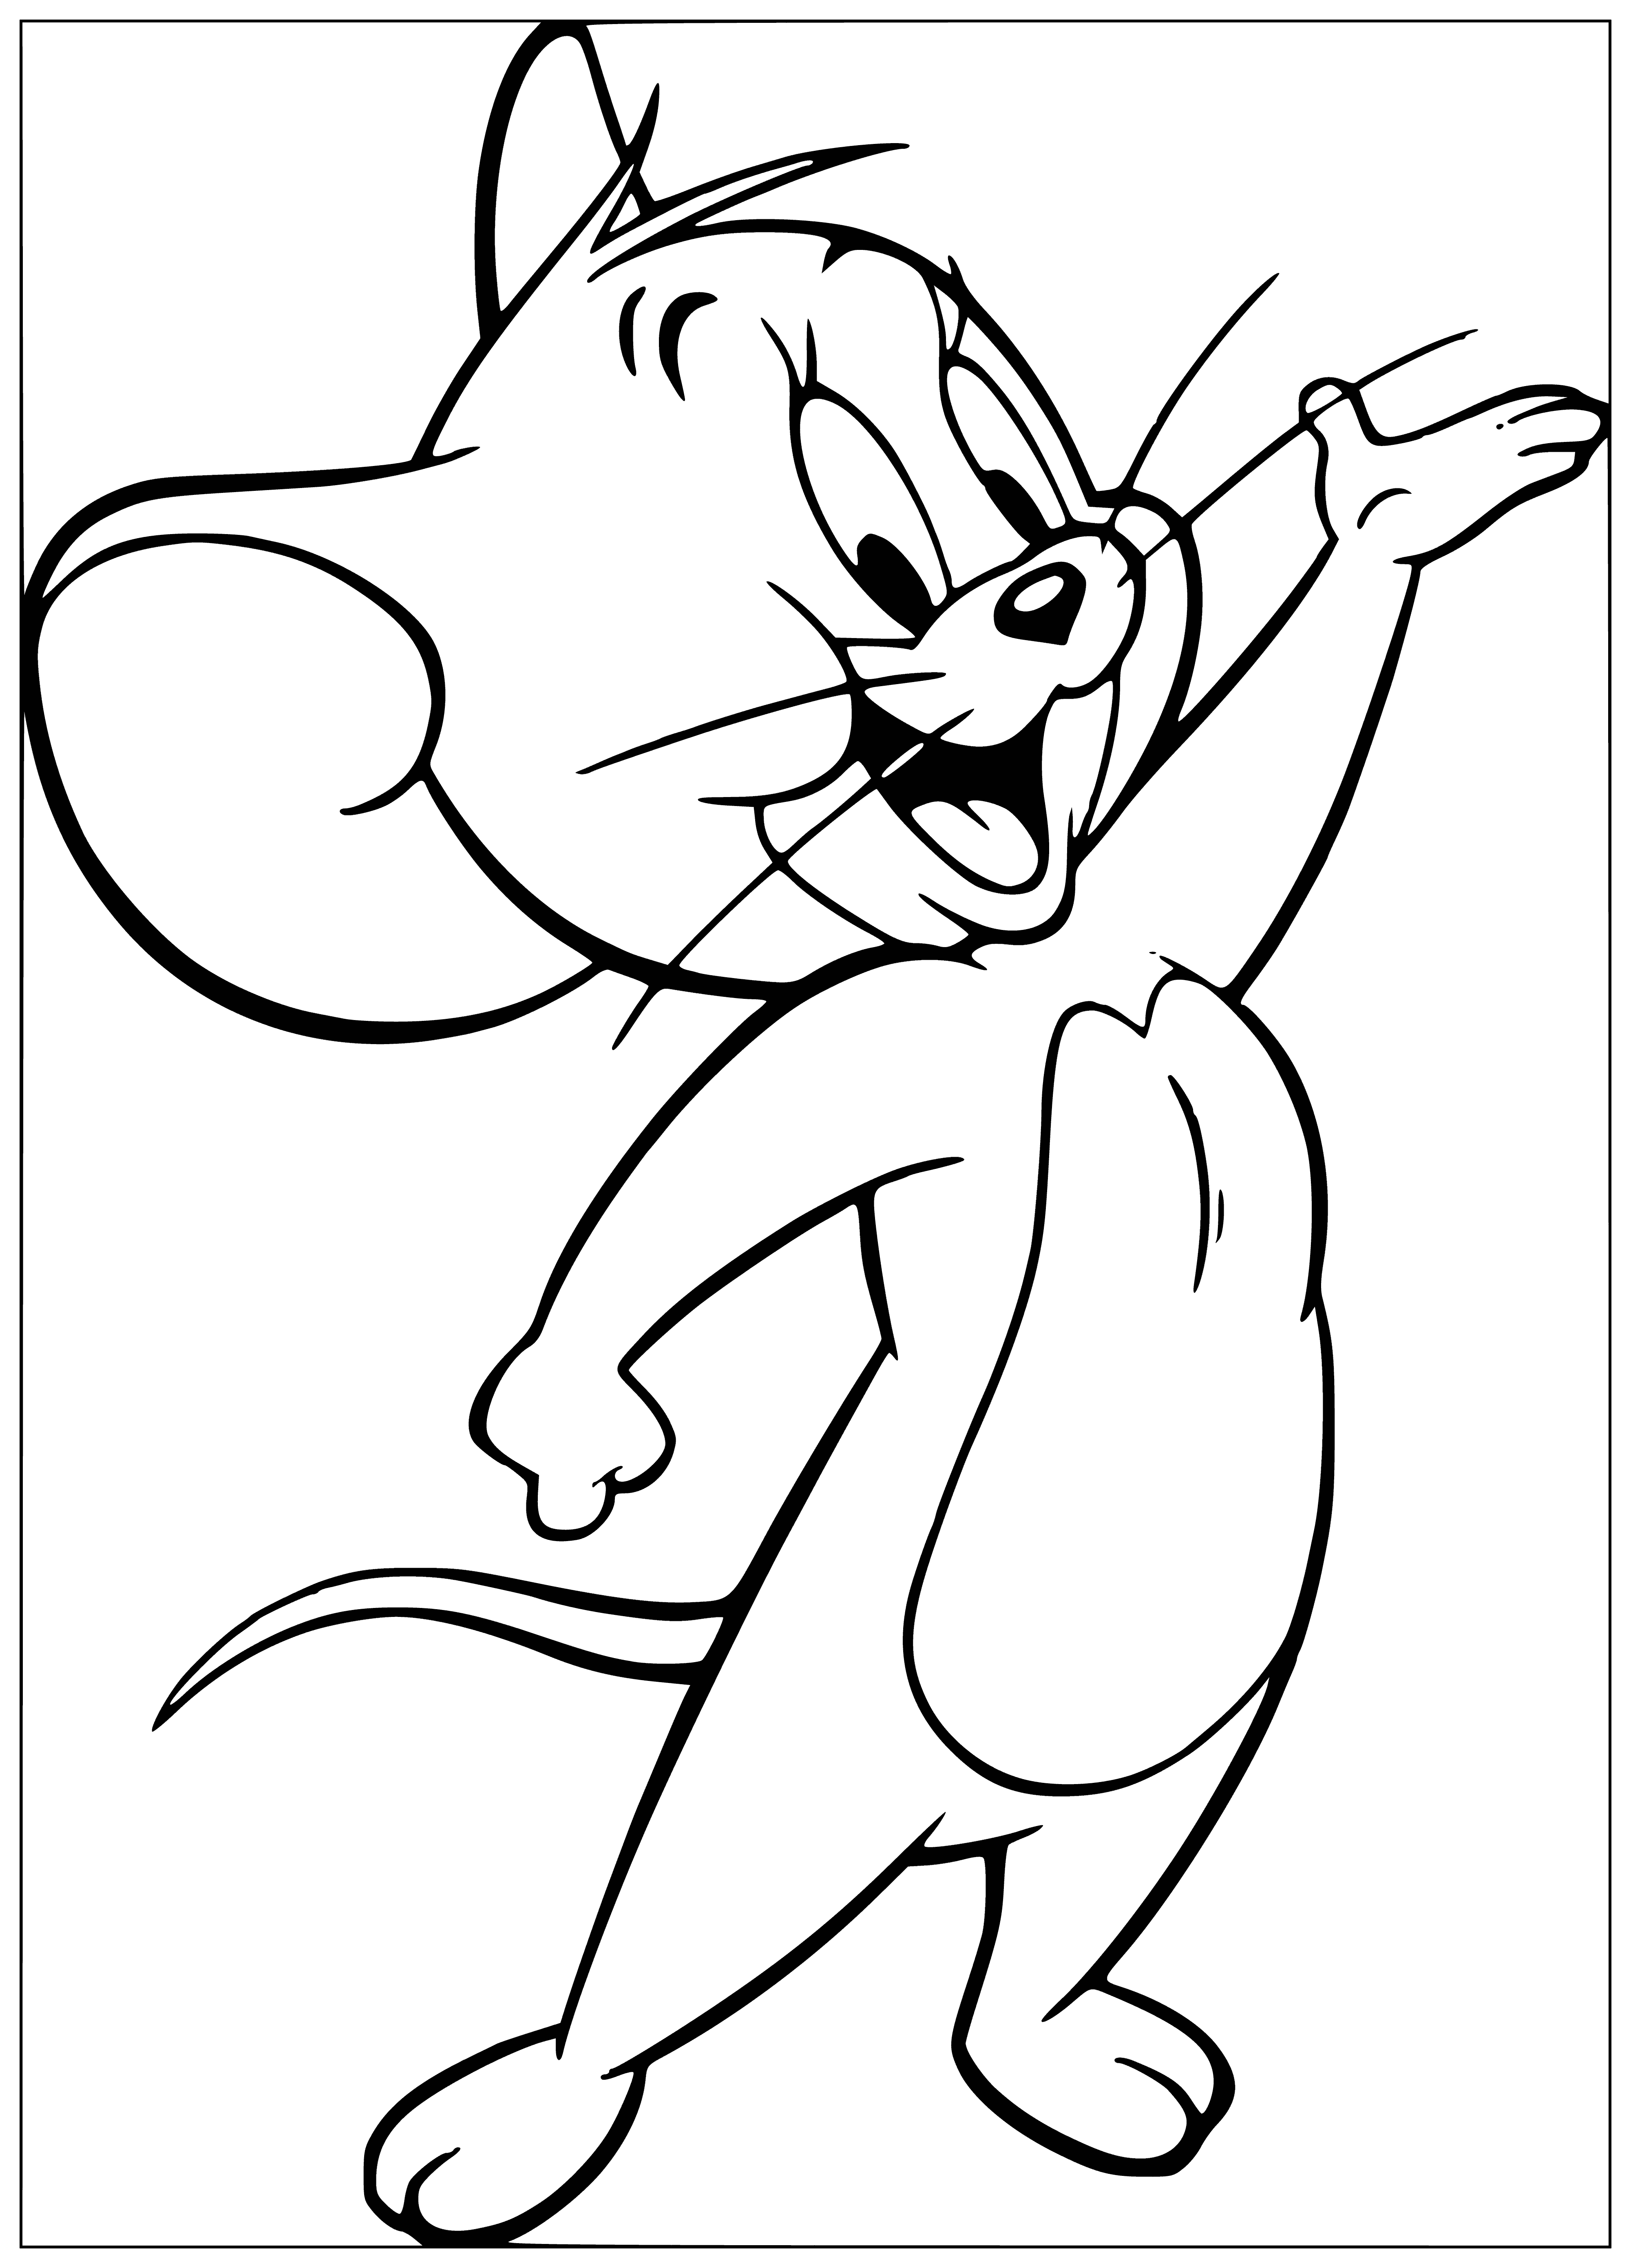 Jerry Mouse coloring page